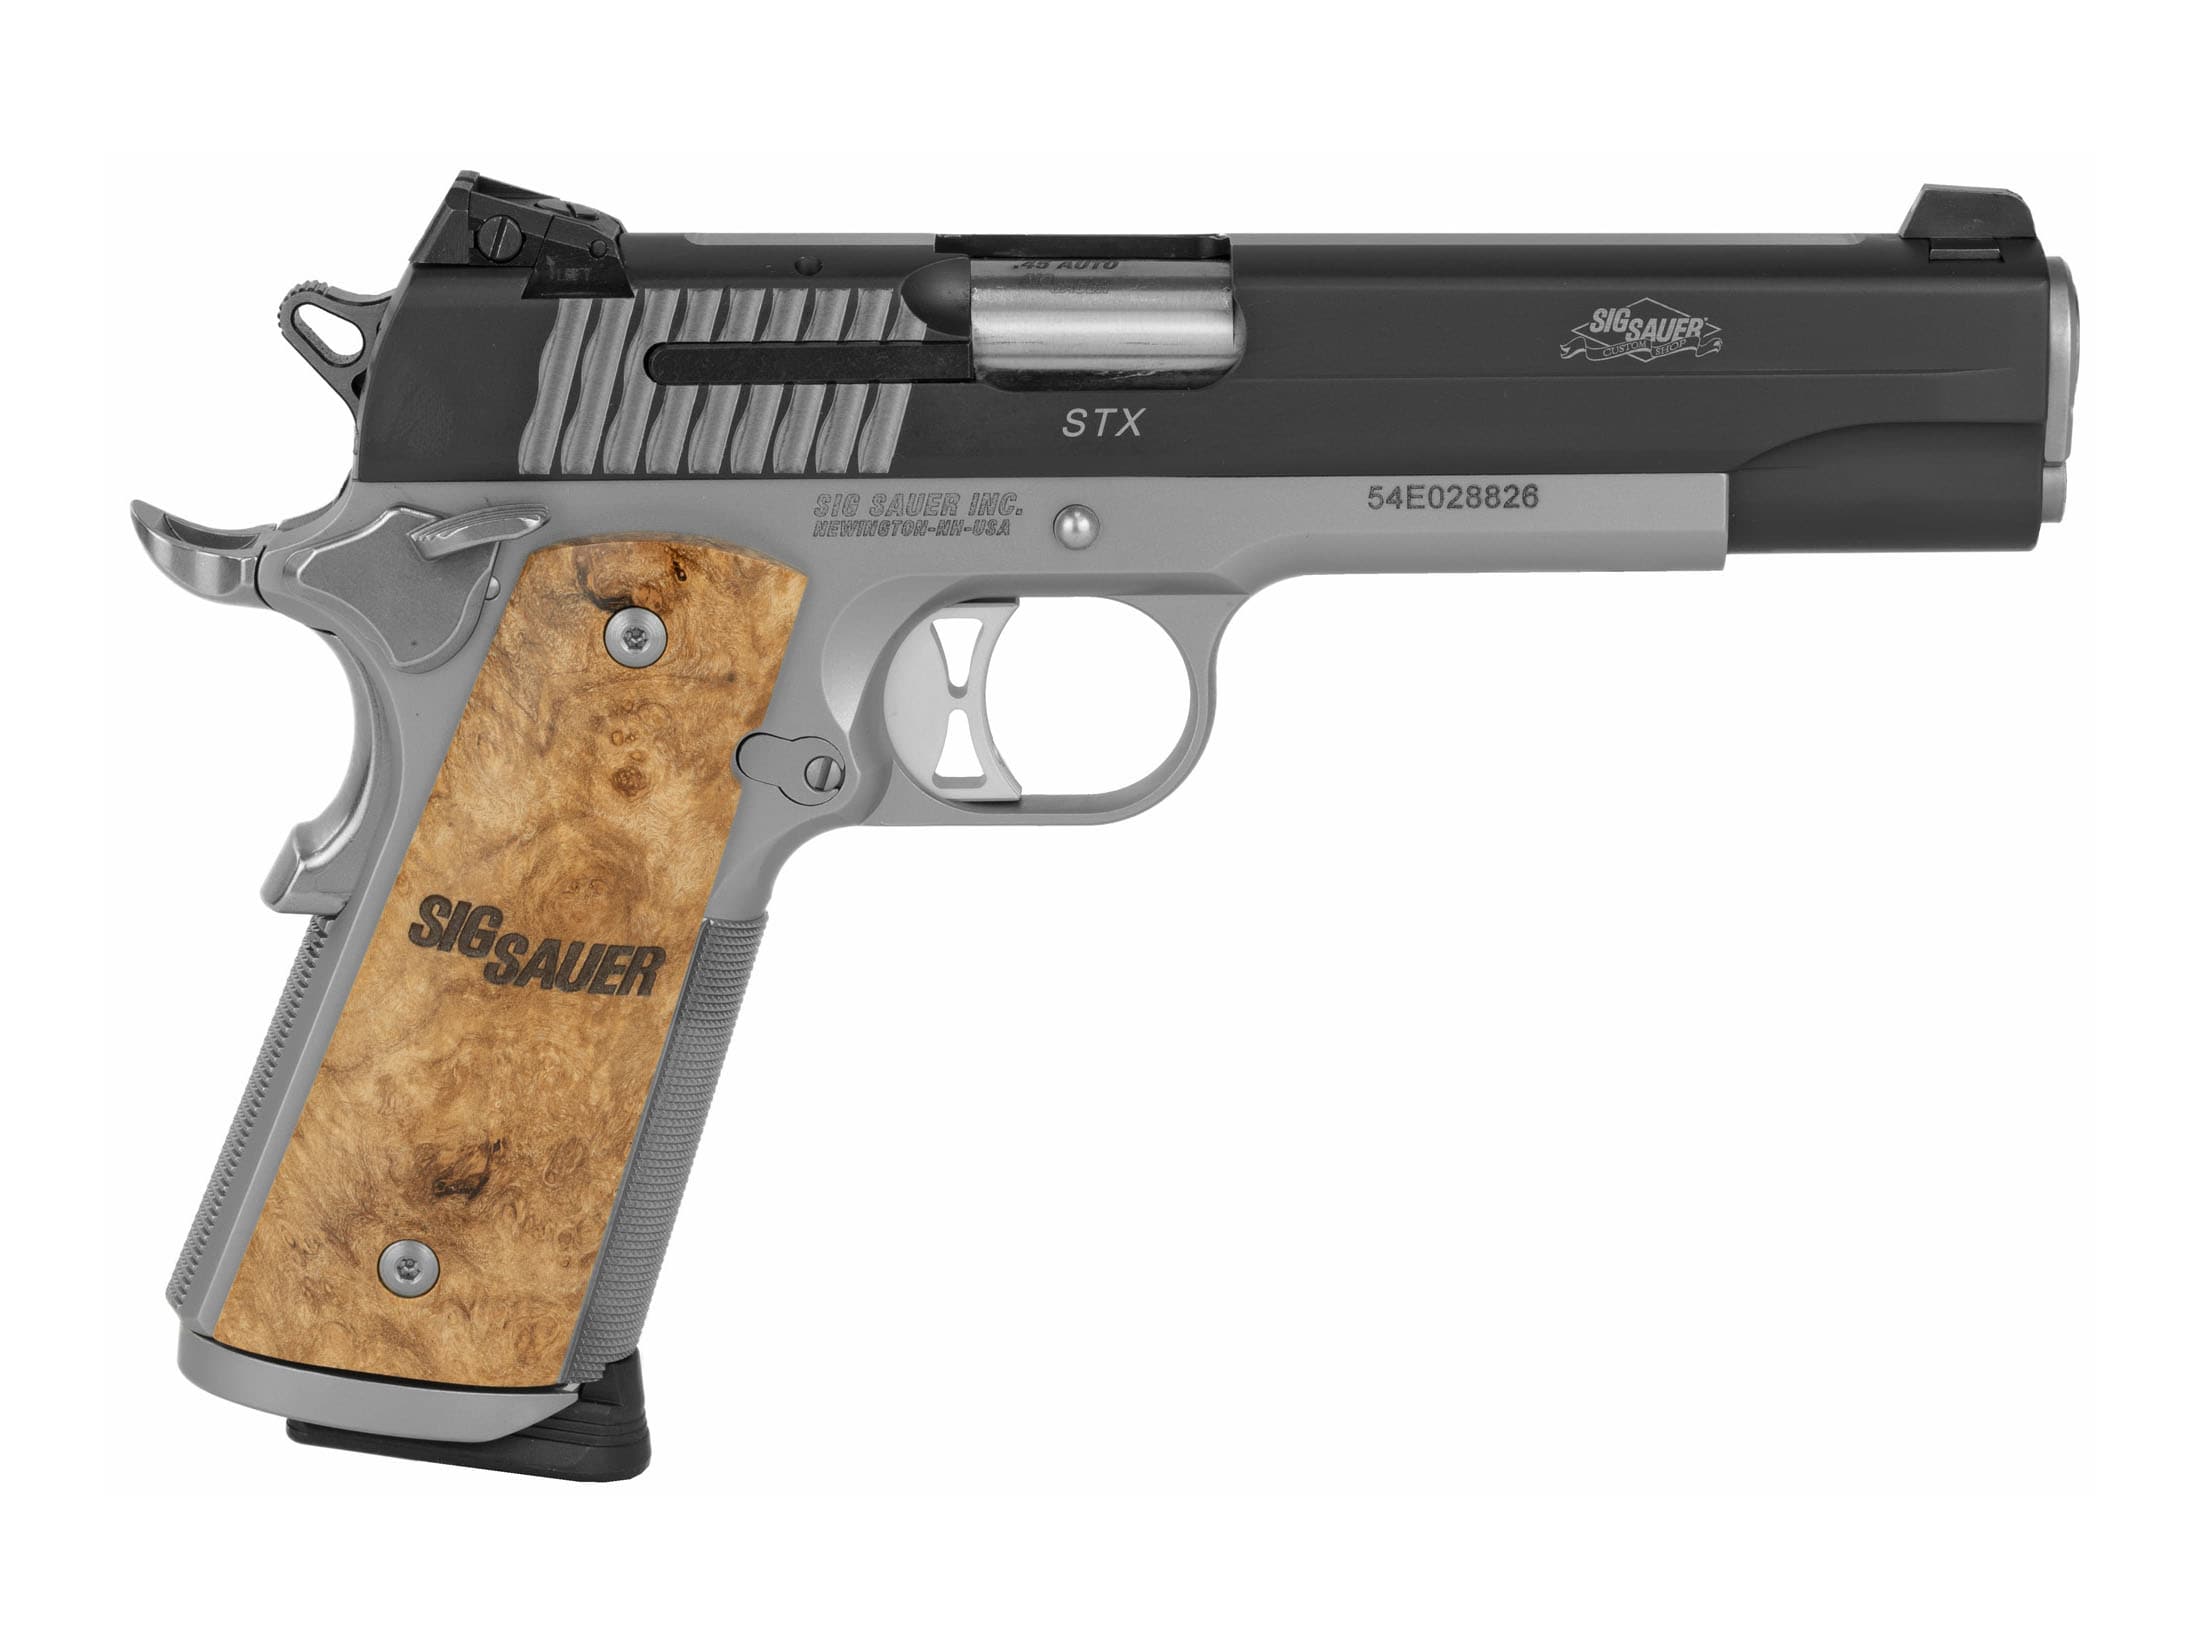 Sig Sauer 1911 STX Semi-Automatic Pistol For Sale | In Stock Now, Don't Miss Out! - Tactical Firearms And Archery